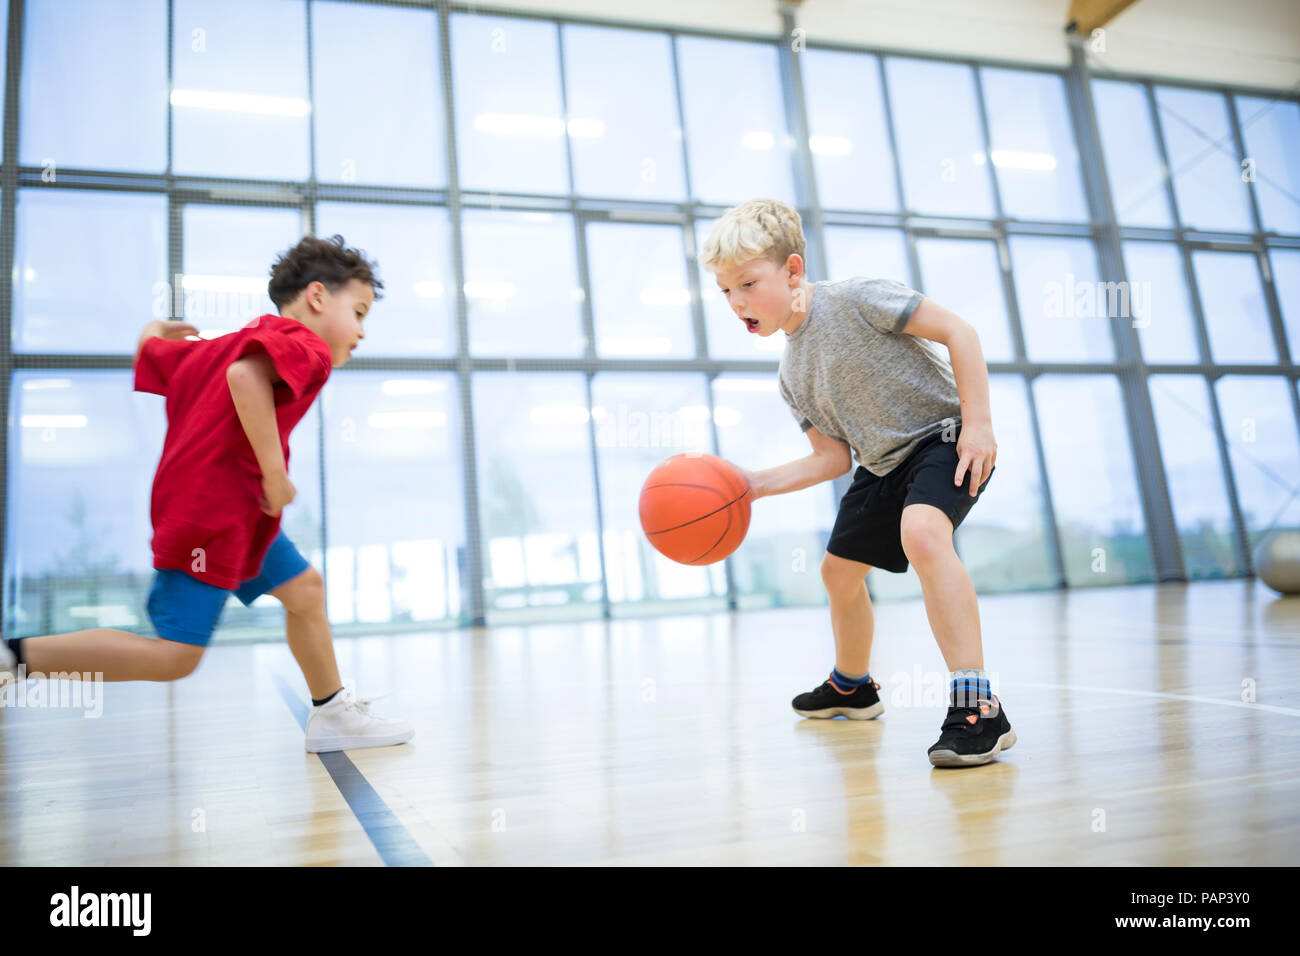 Two schoolboys playing basketball in gym class Stock Photo